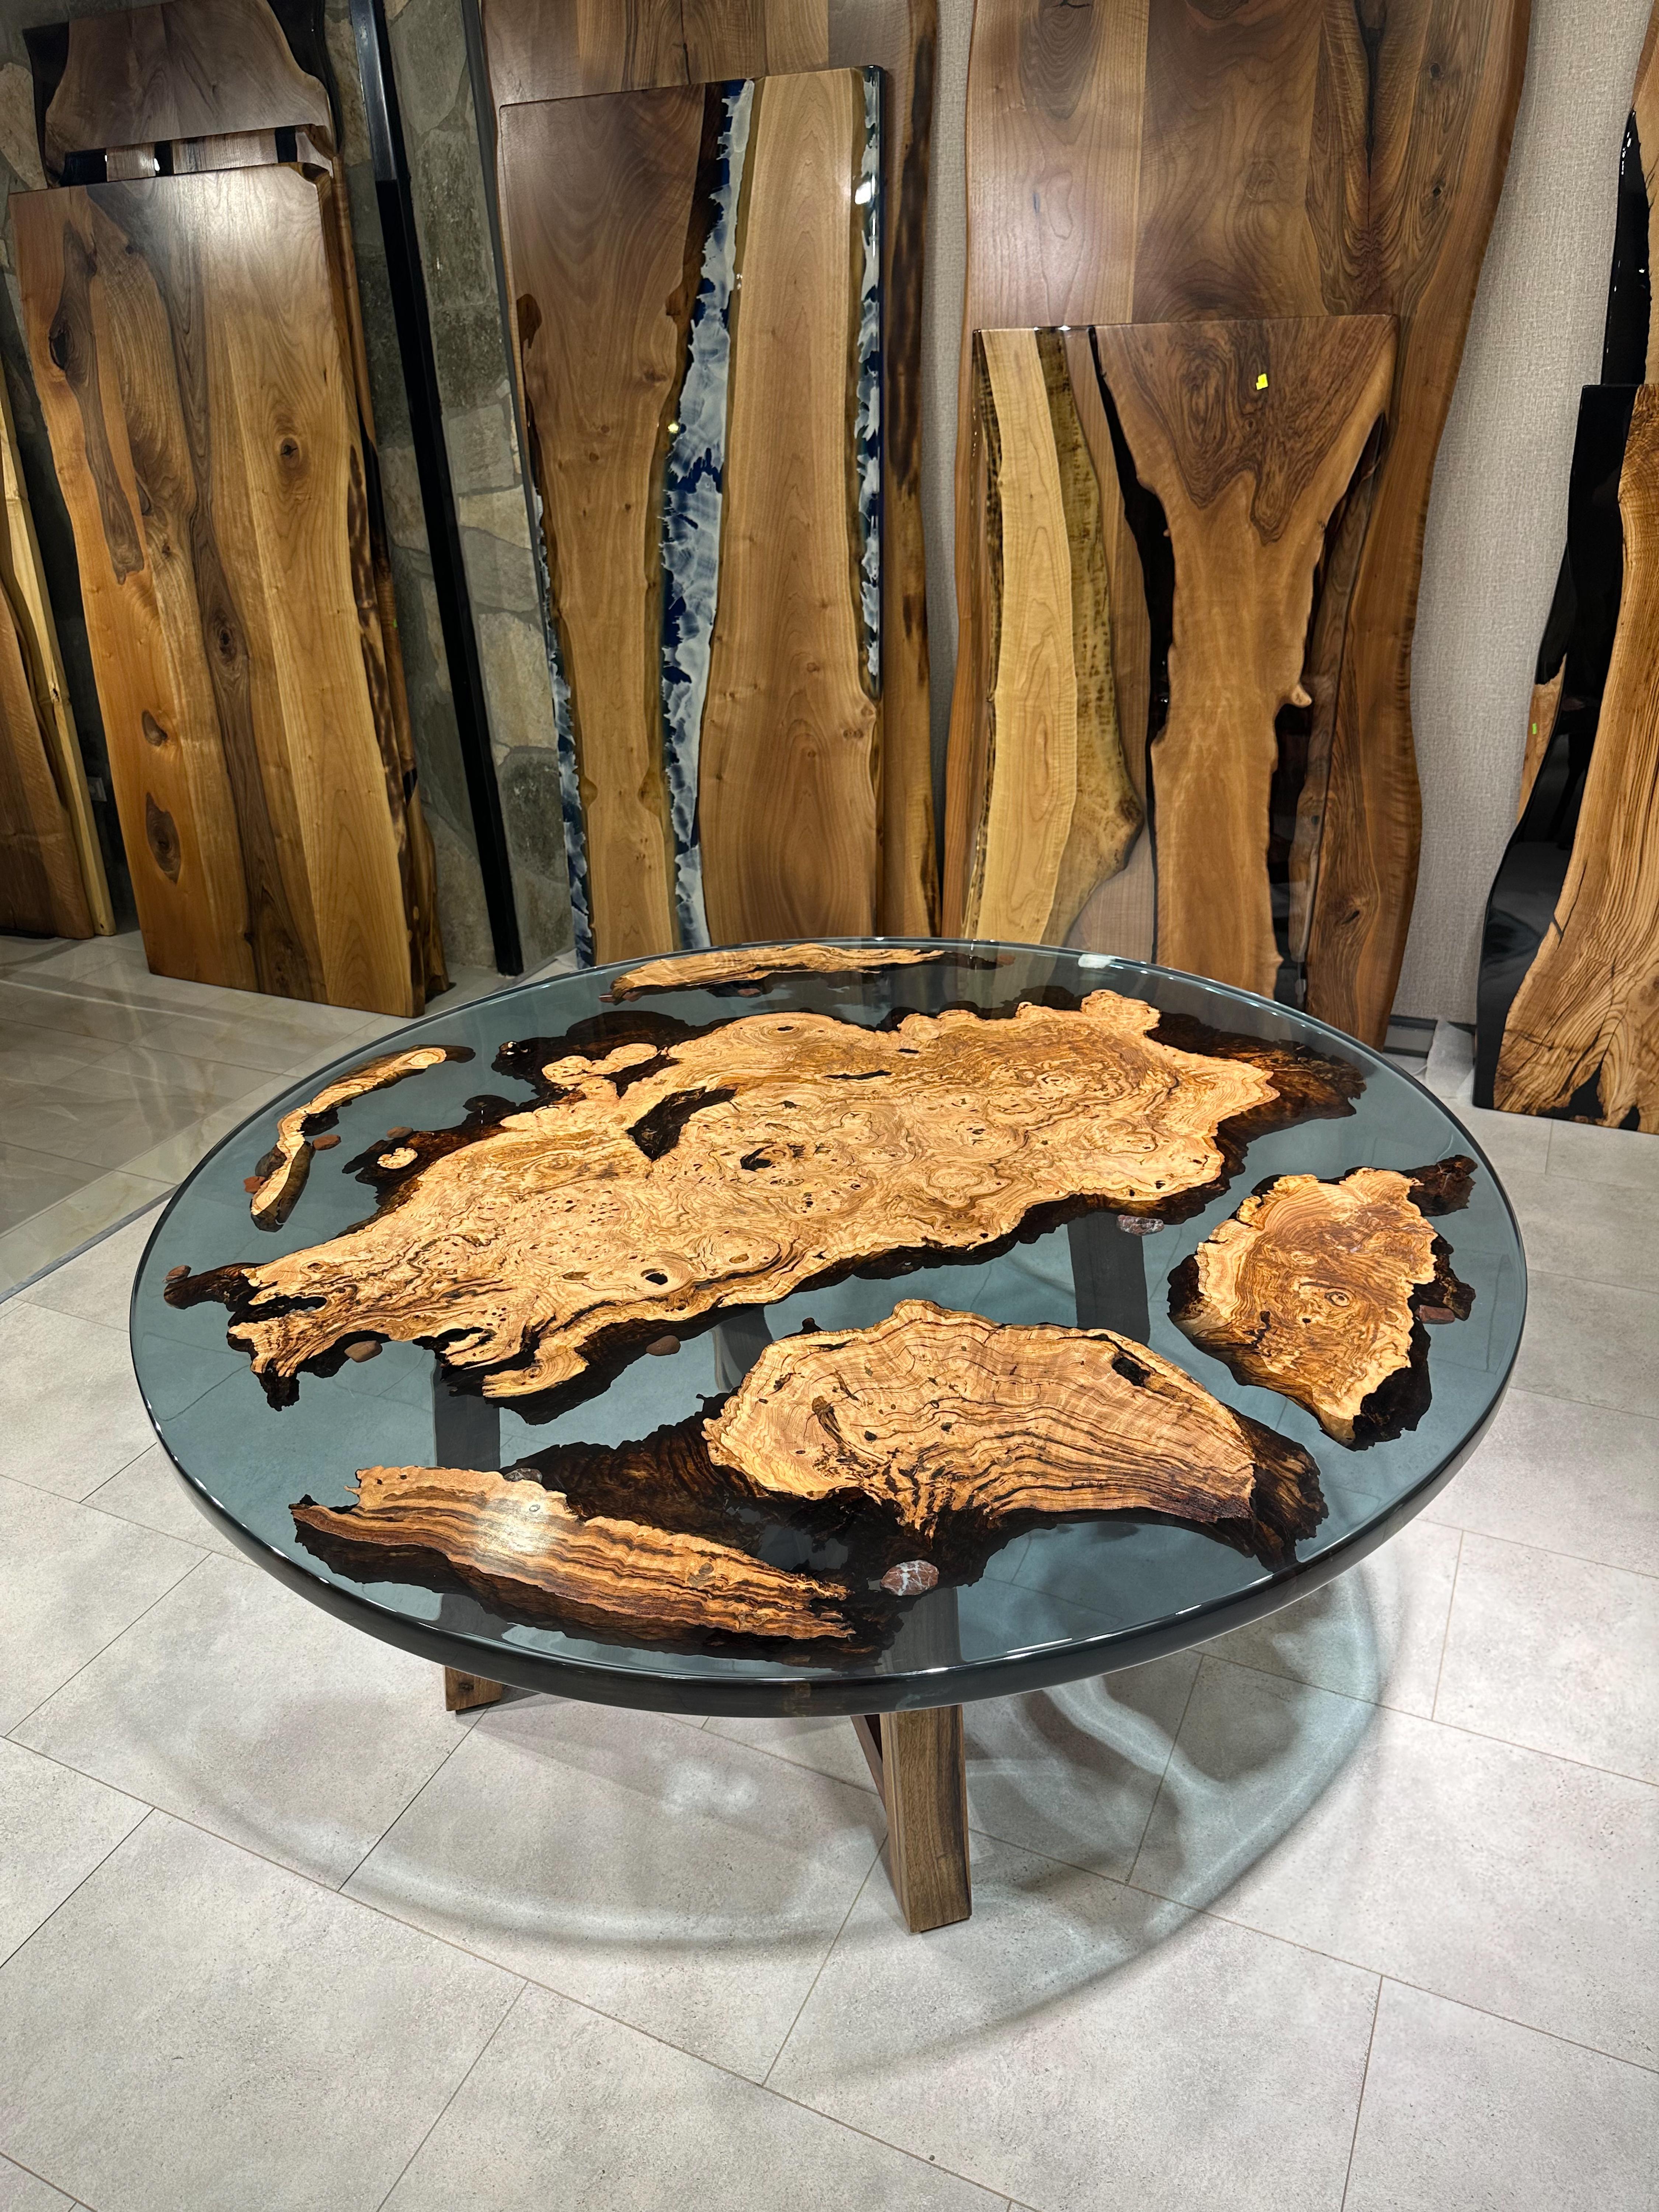 Walnut Custom Blue Epoxy Resin Round Dining Table 

This table is made of 500 years old walnut wood. The grains and texture of the wood describe what a natural walnut woods looks like.
It can be used as a dining table or as a conference table.